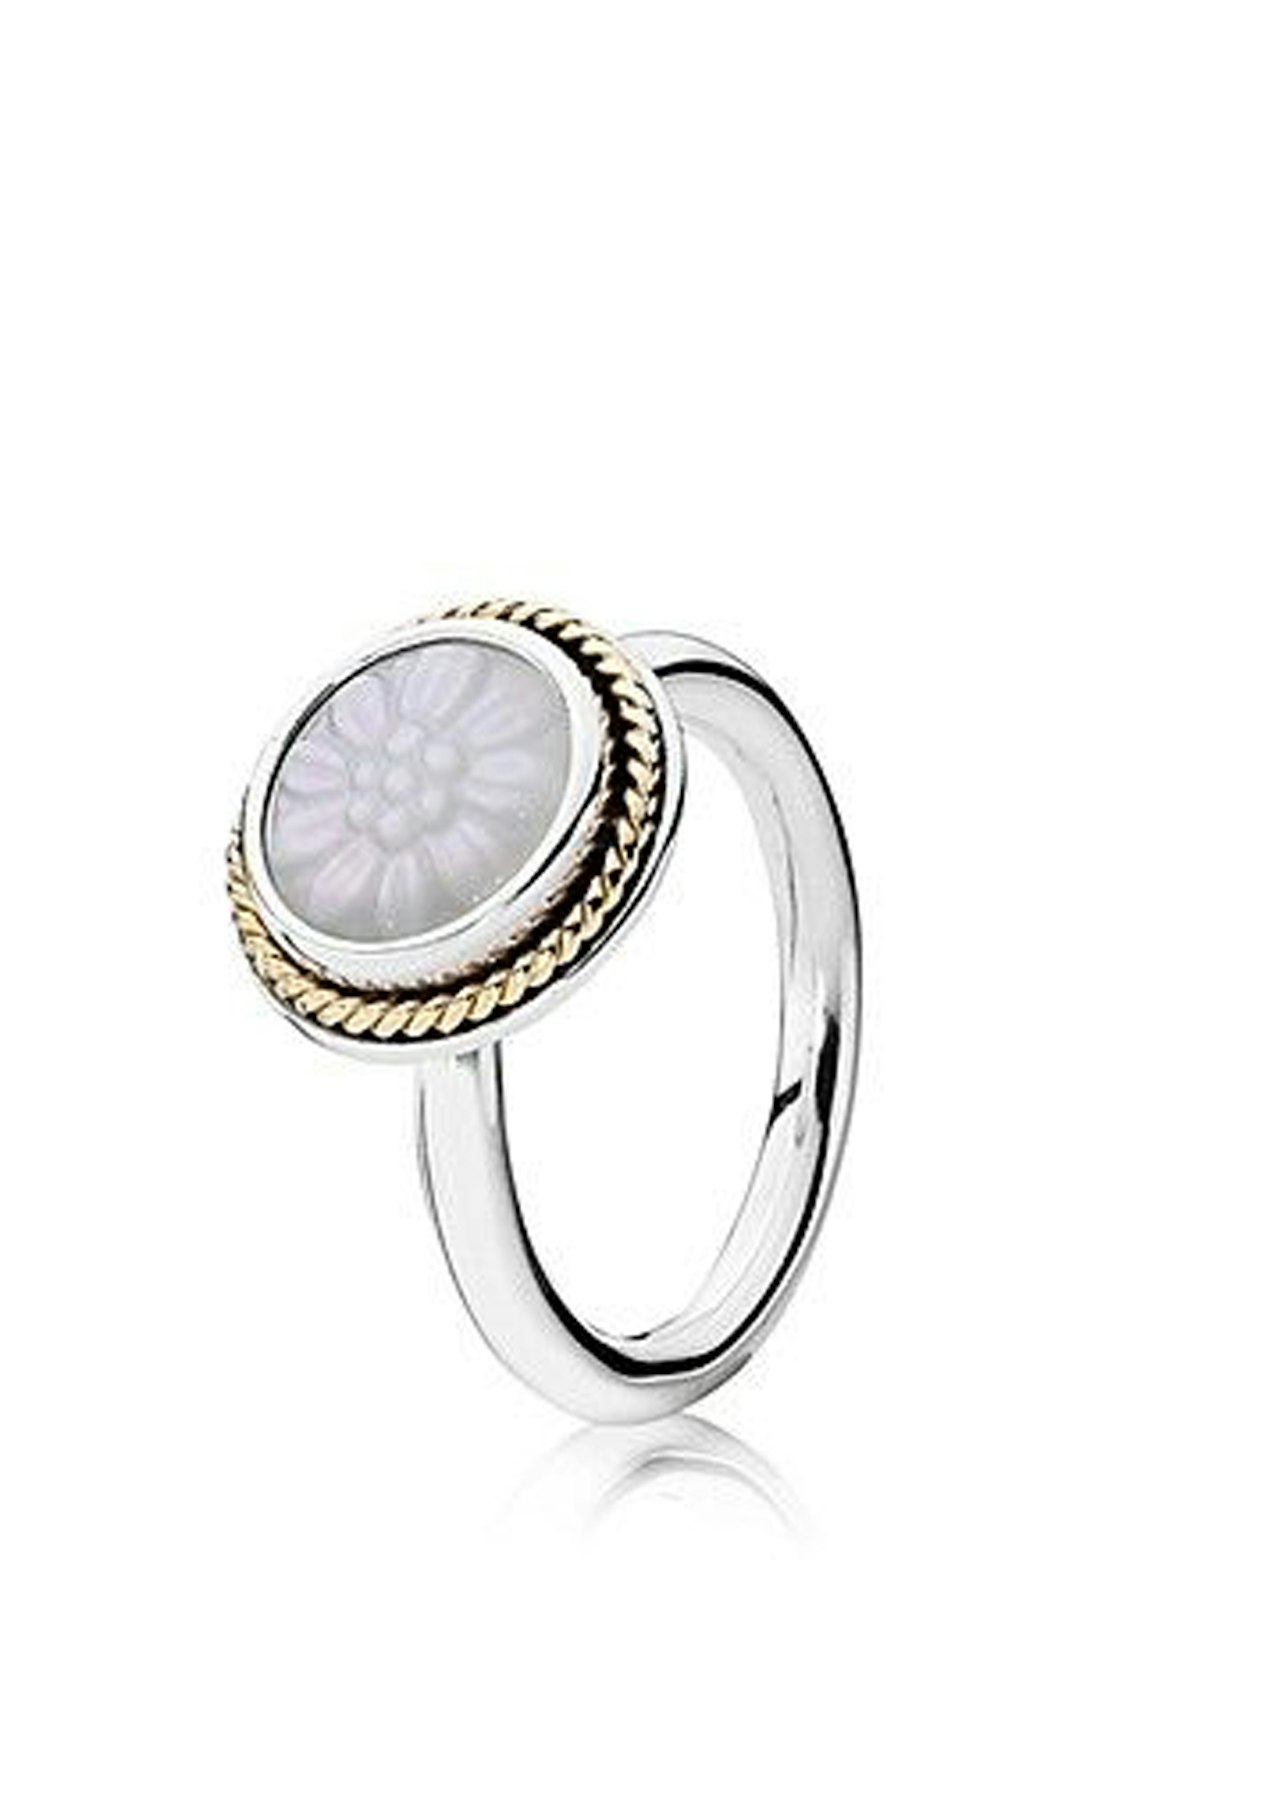 Pandora Silver Feature Ring w 14k & White Mother of Pearl Carved w